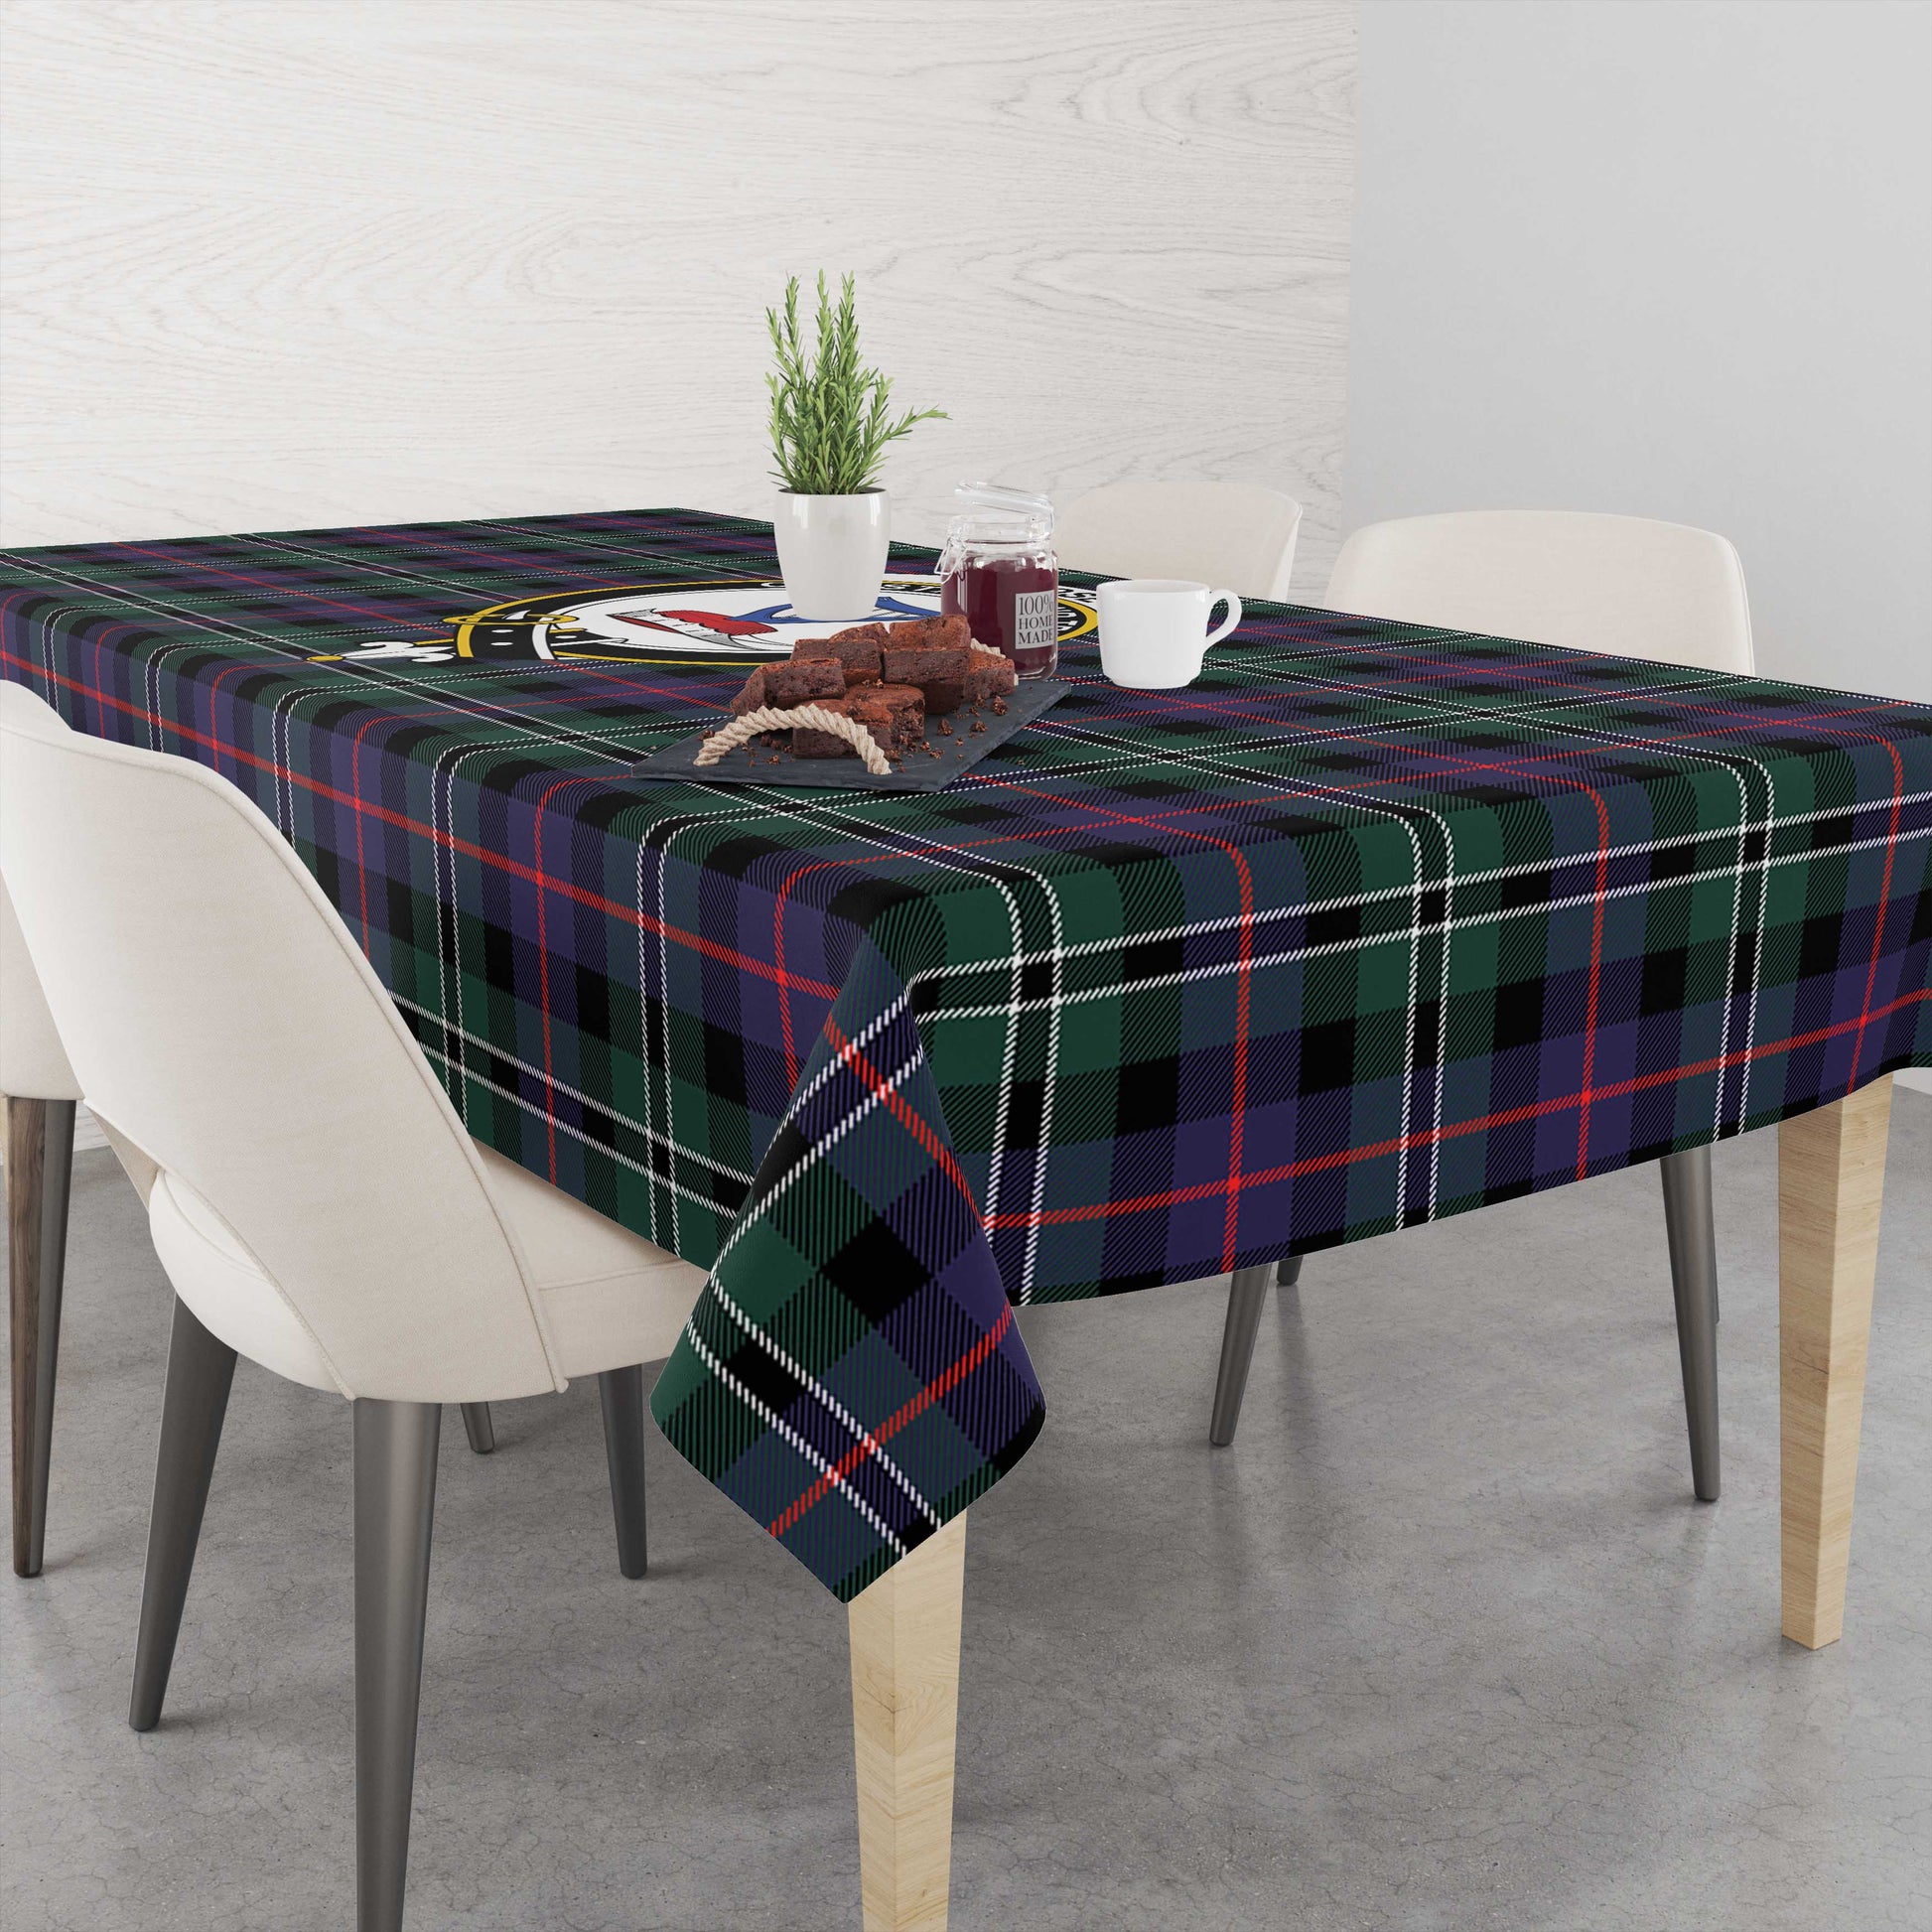 rose-hunting-modern-tatan-tablecloth-with-family-crest